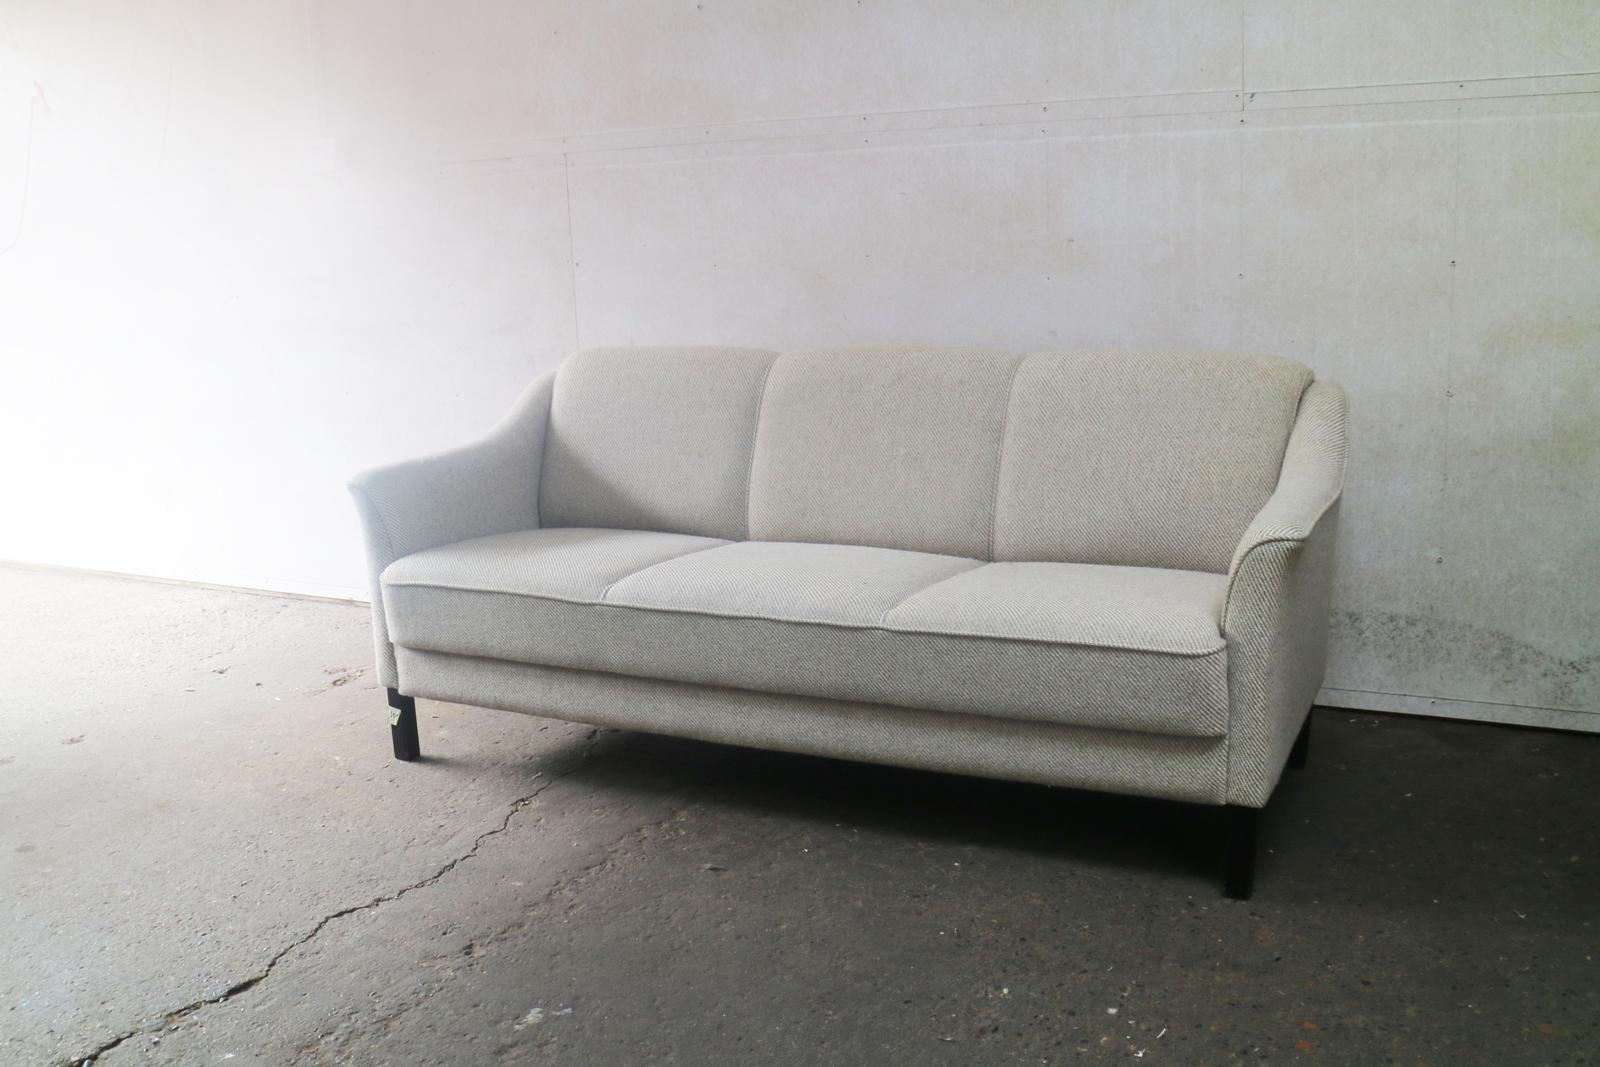 A beautiful Danish midcentury sofa, with the original ribbed woollen upholstery. In immaculate condition, with very firm cushioning. Classically designed with beautifully contoured arms. Sits on stained beech feet.

 